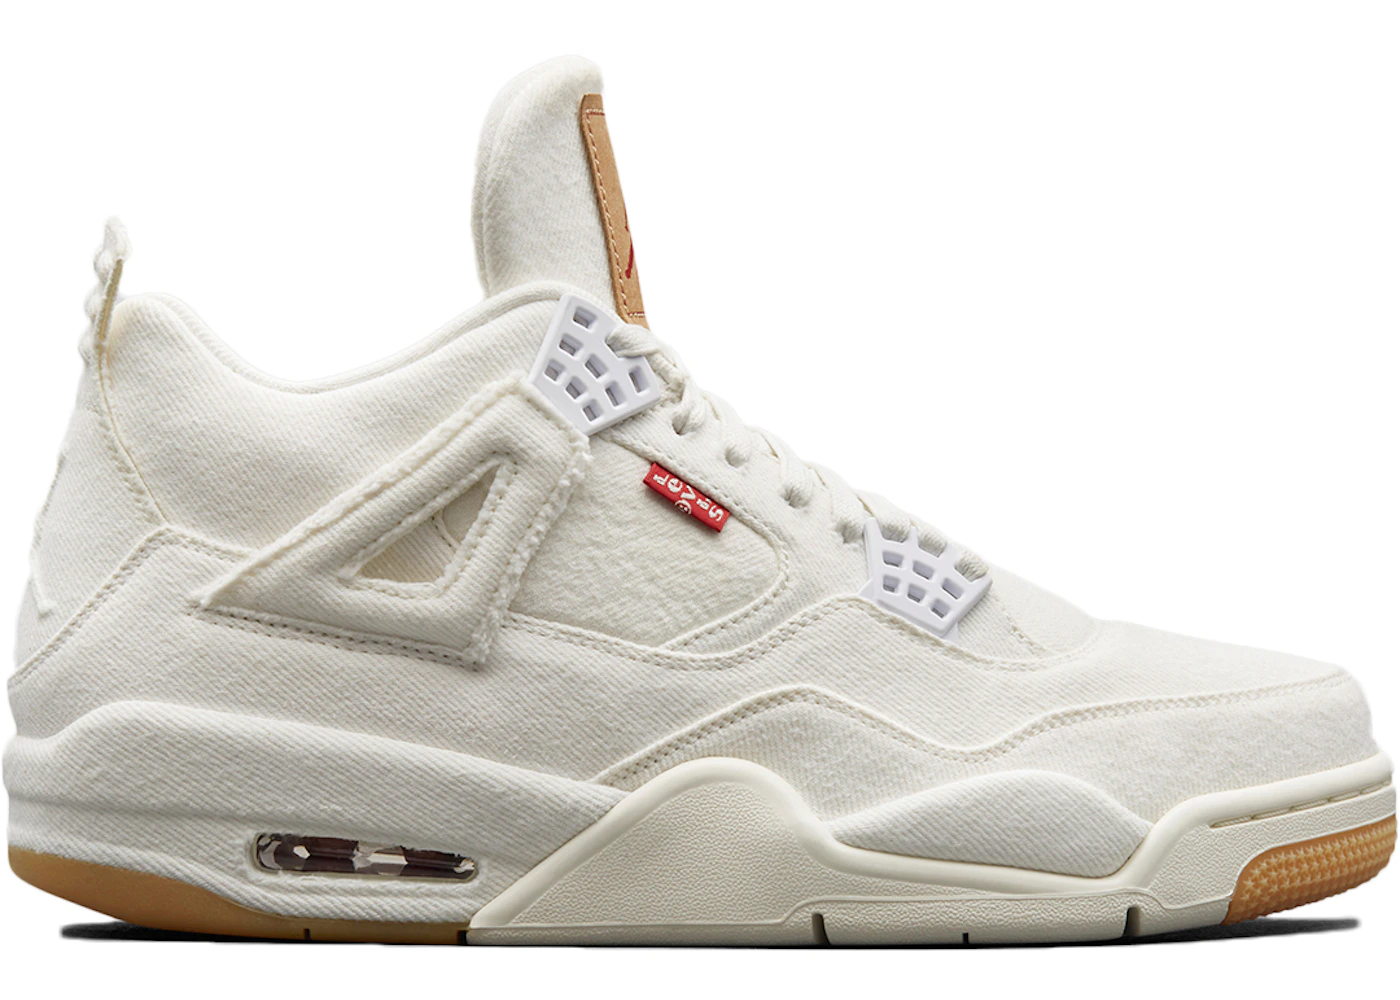 Army too much Hearing Jordan 4 Retro Levi's White (Levi's Tag) - AO2571-100 - US